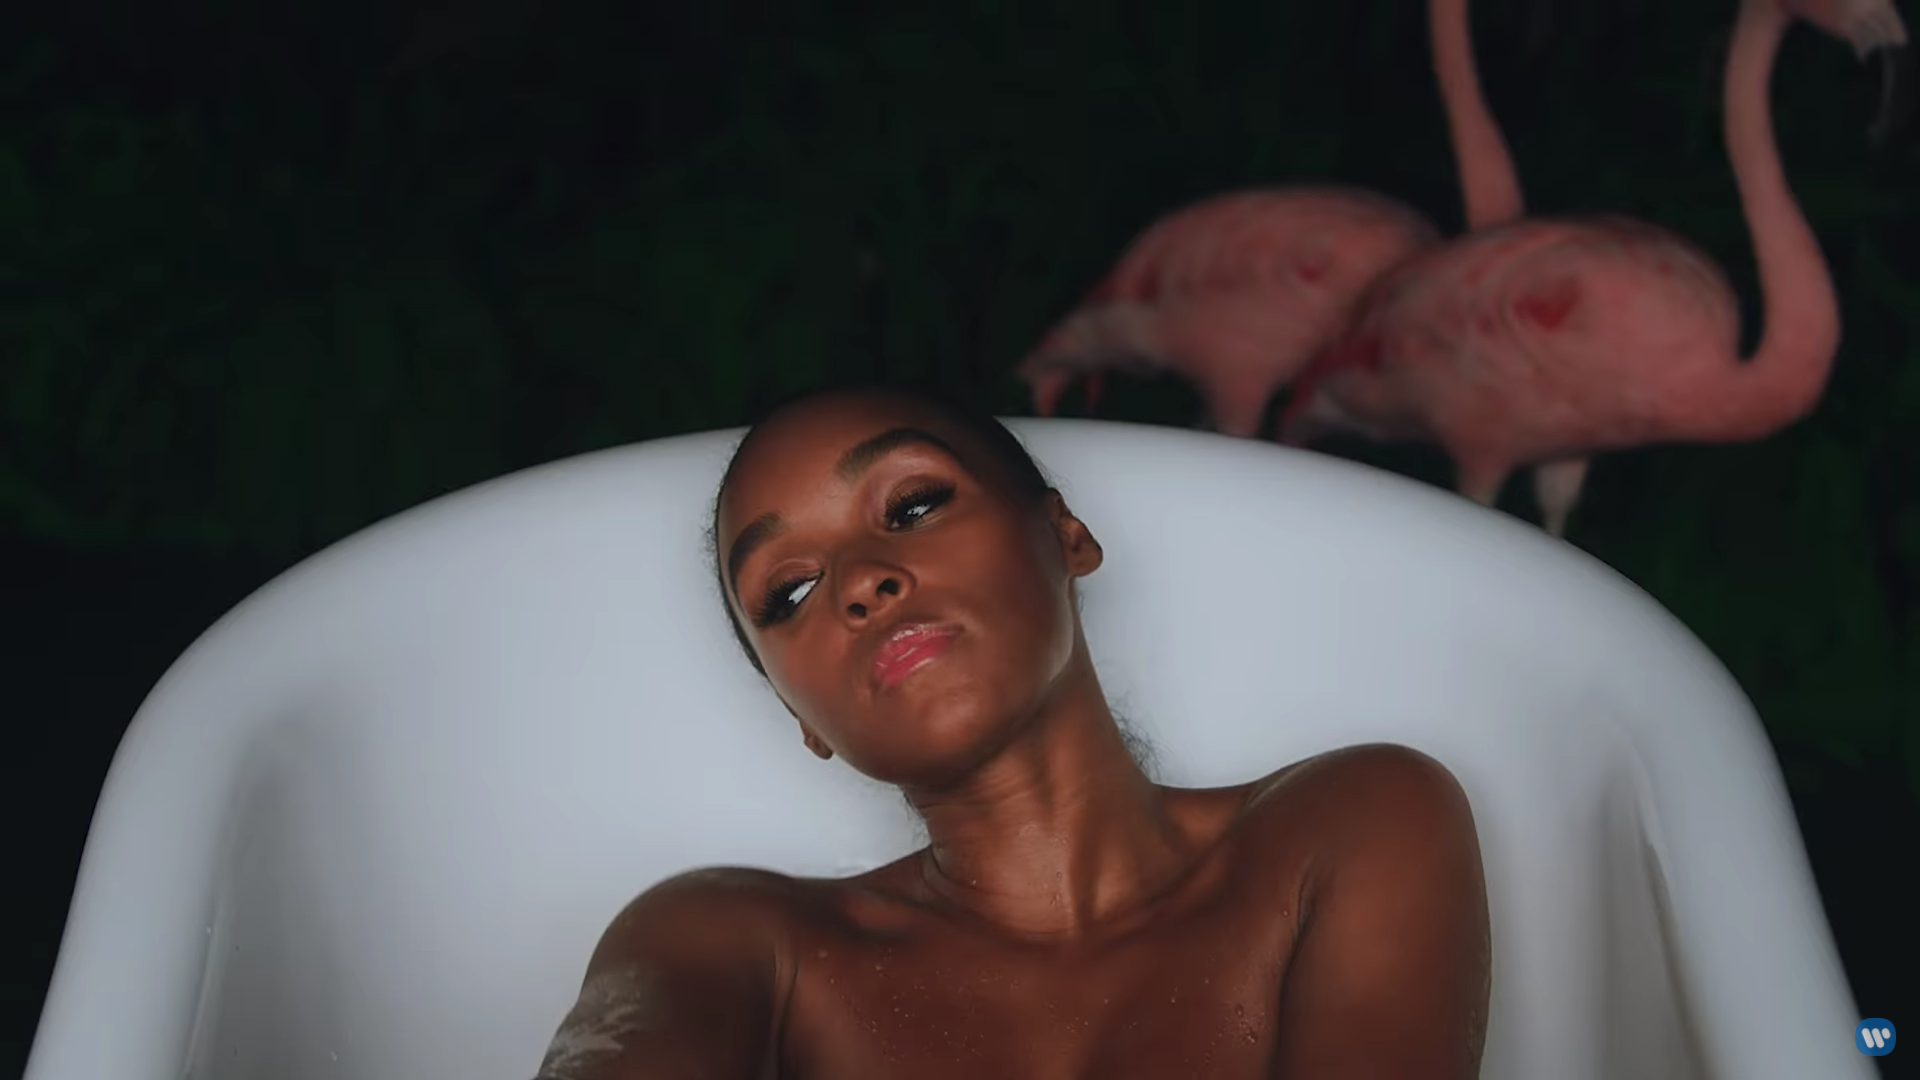 Janelle Monáe's Dirty Computer Trailer is Full of Symbolic Looks.